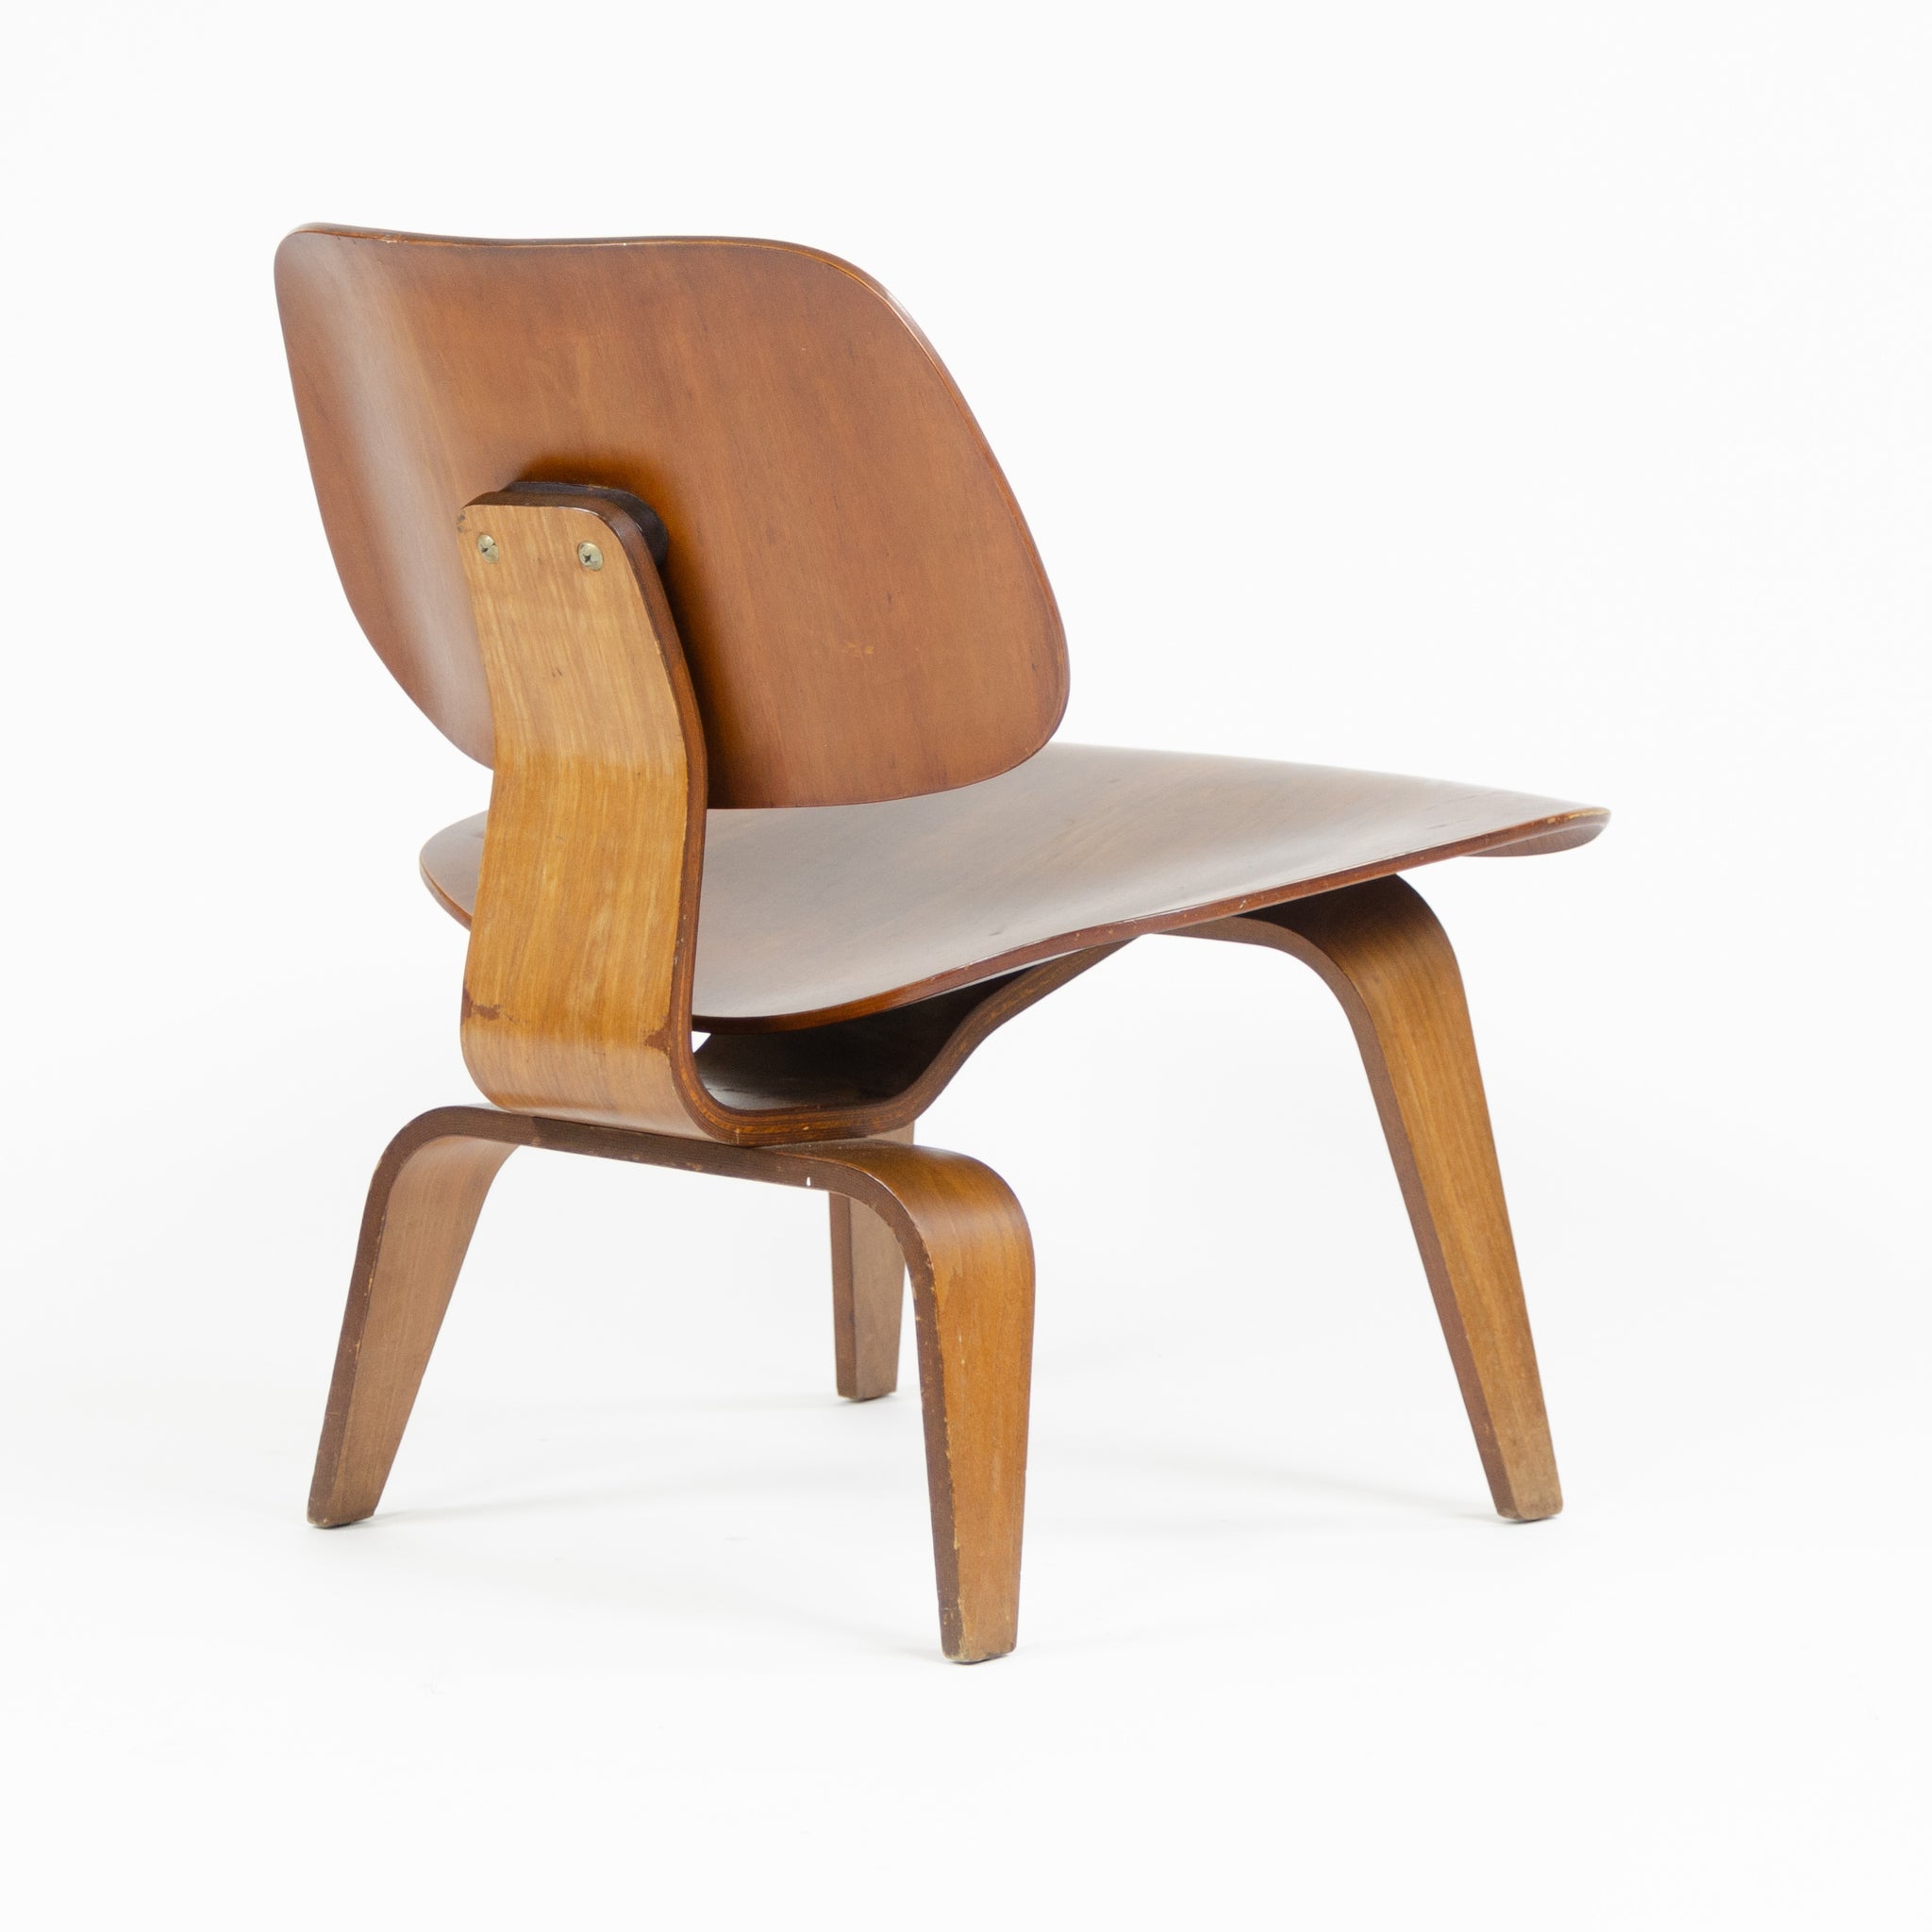 SOLD 1951 Eames Herman Miller LCW Lounge Chair Wood Evans Walnut